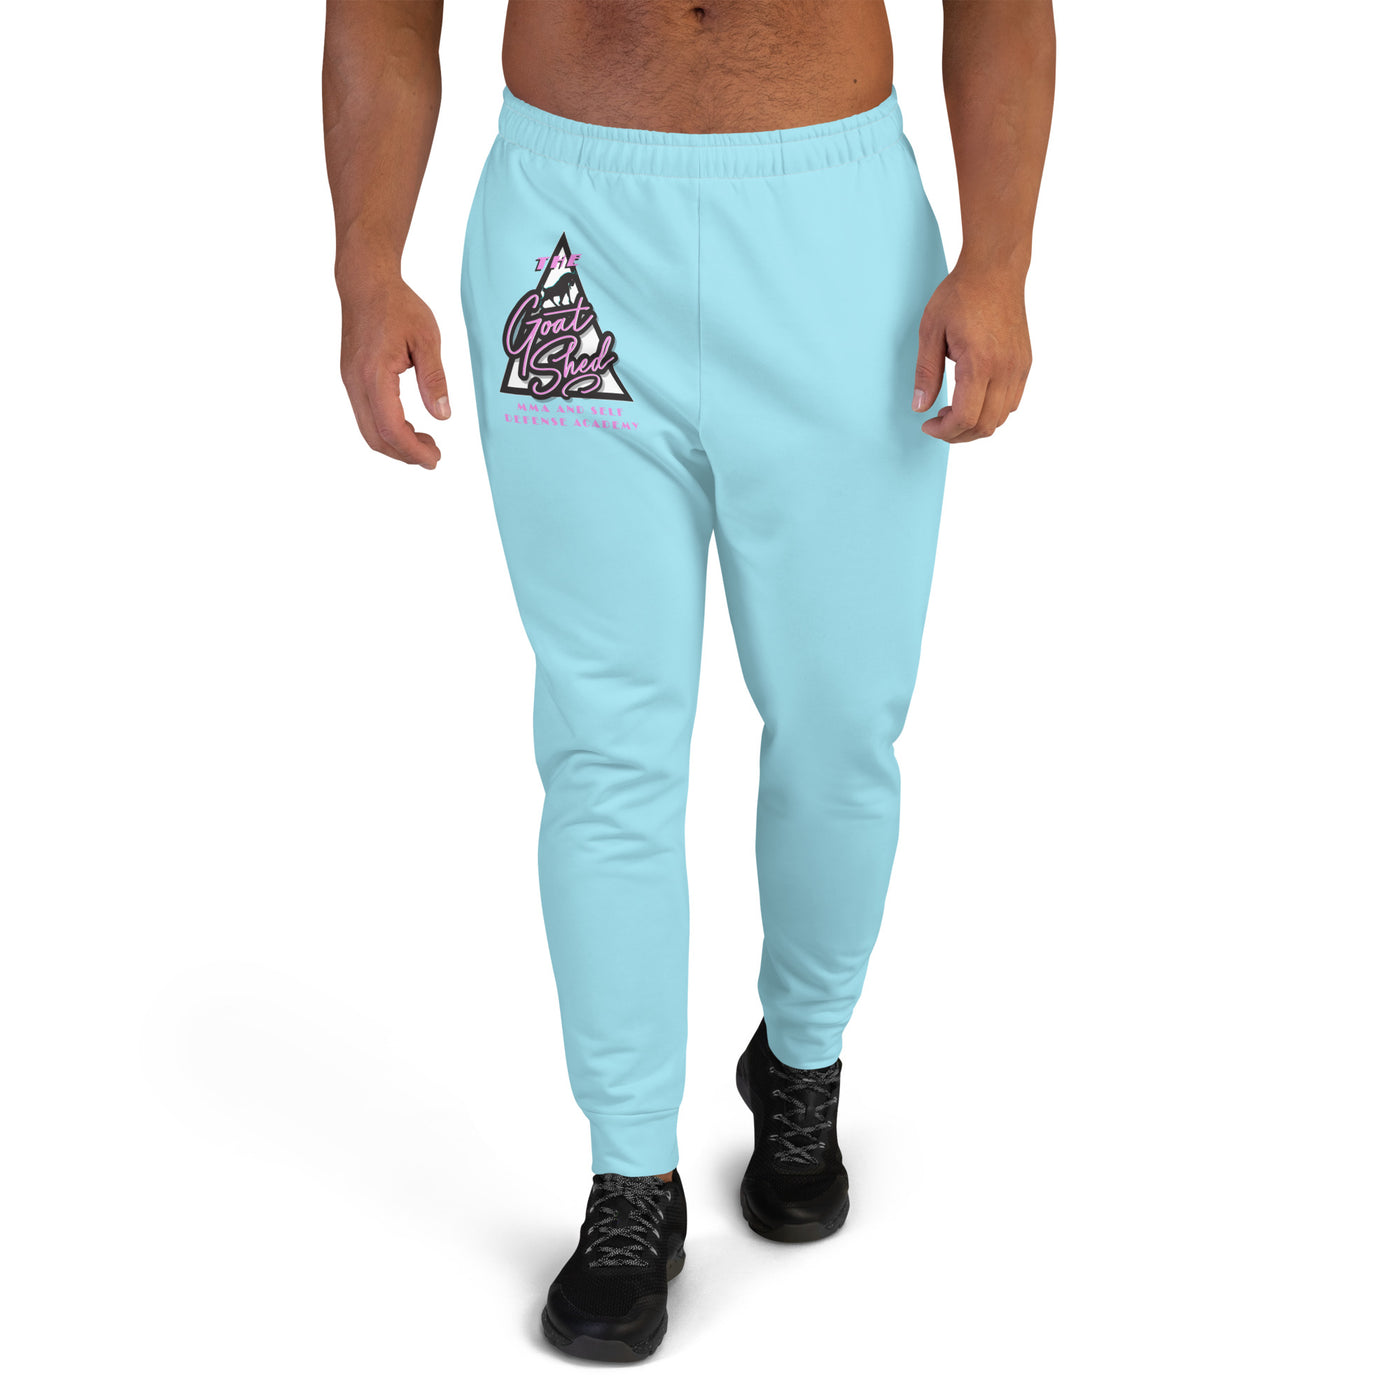 Goat Shed Joggers